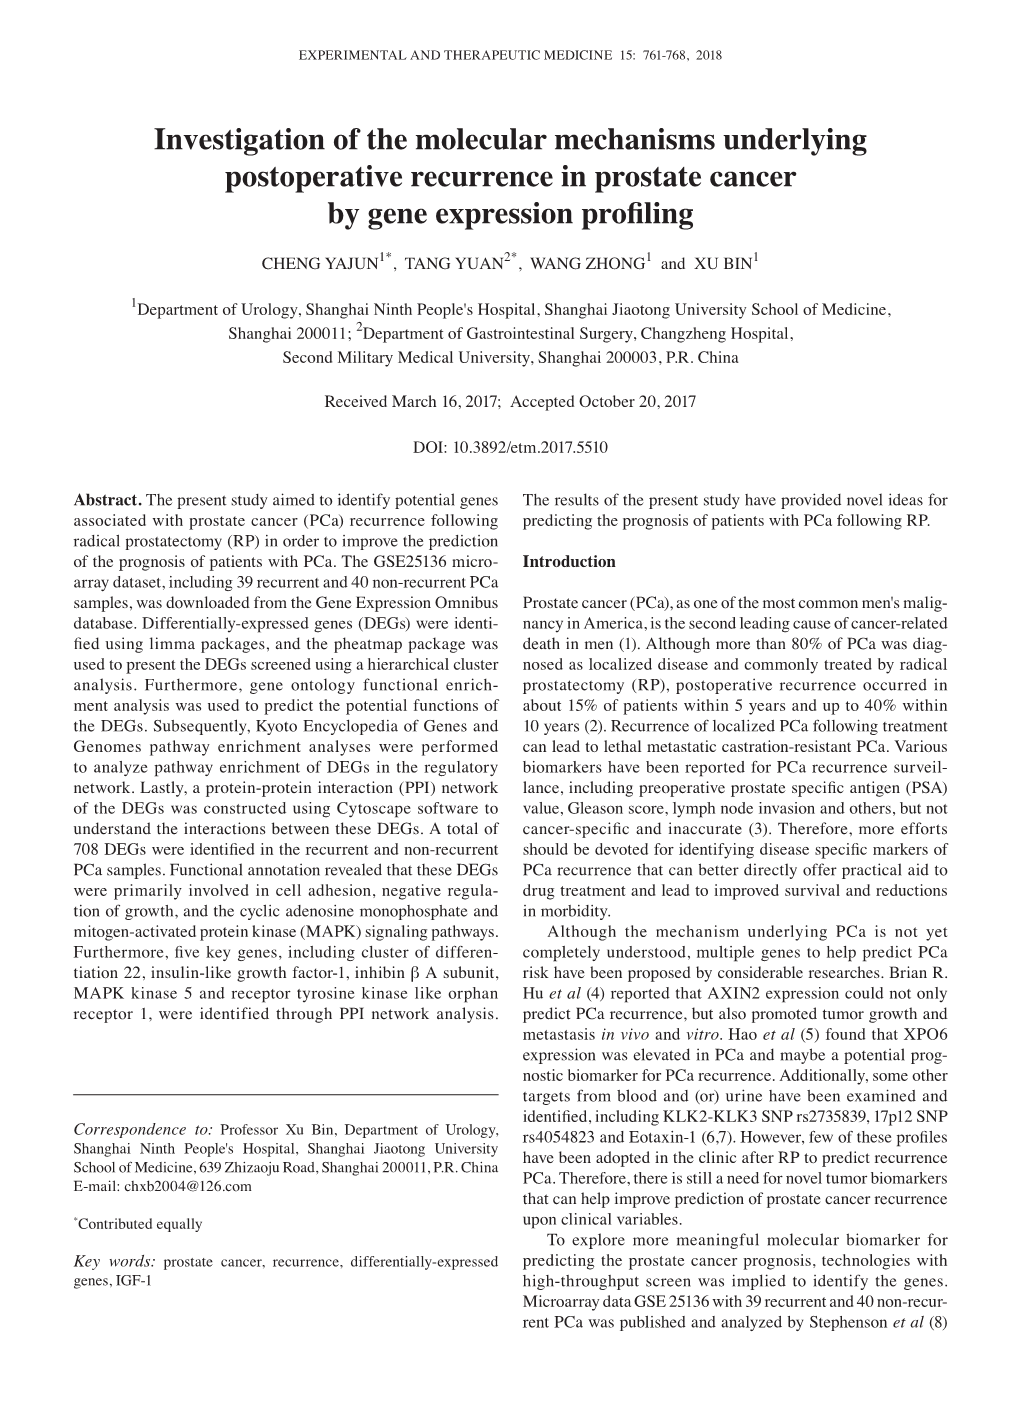 Investigation of the Molecular Mechanisms Underlying Postoperative Recurrence in Prostate Cancer by Gene Expression Profiling